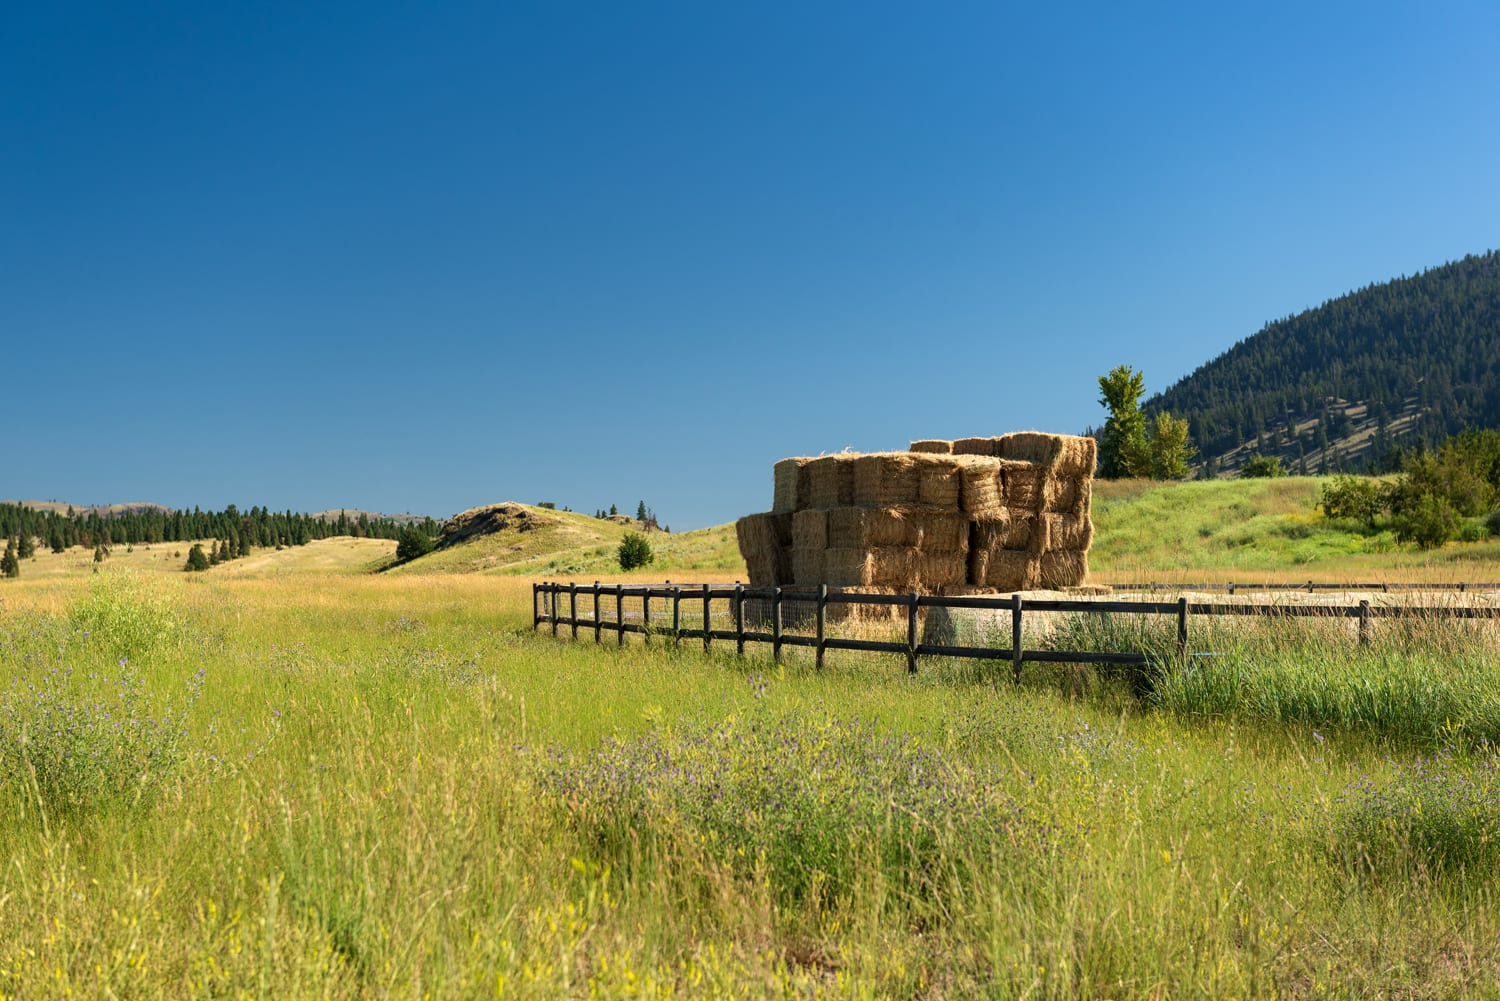 Kamloops rural life tall hay bales stacked on top of one another with tall green grass